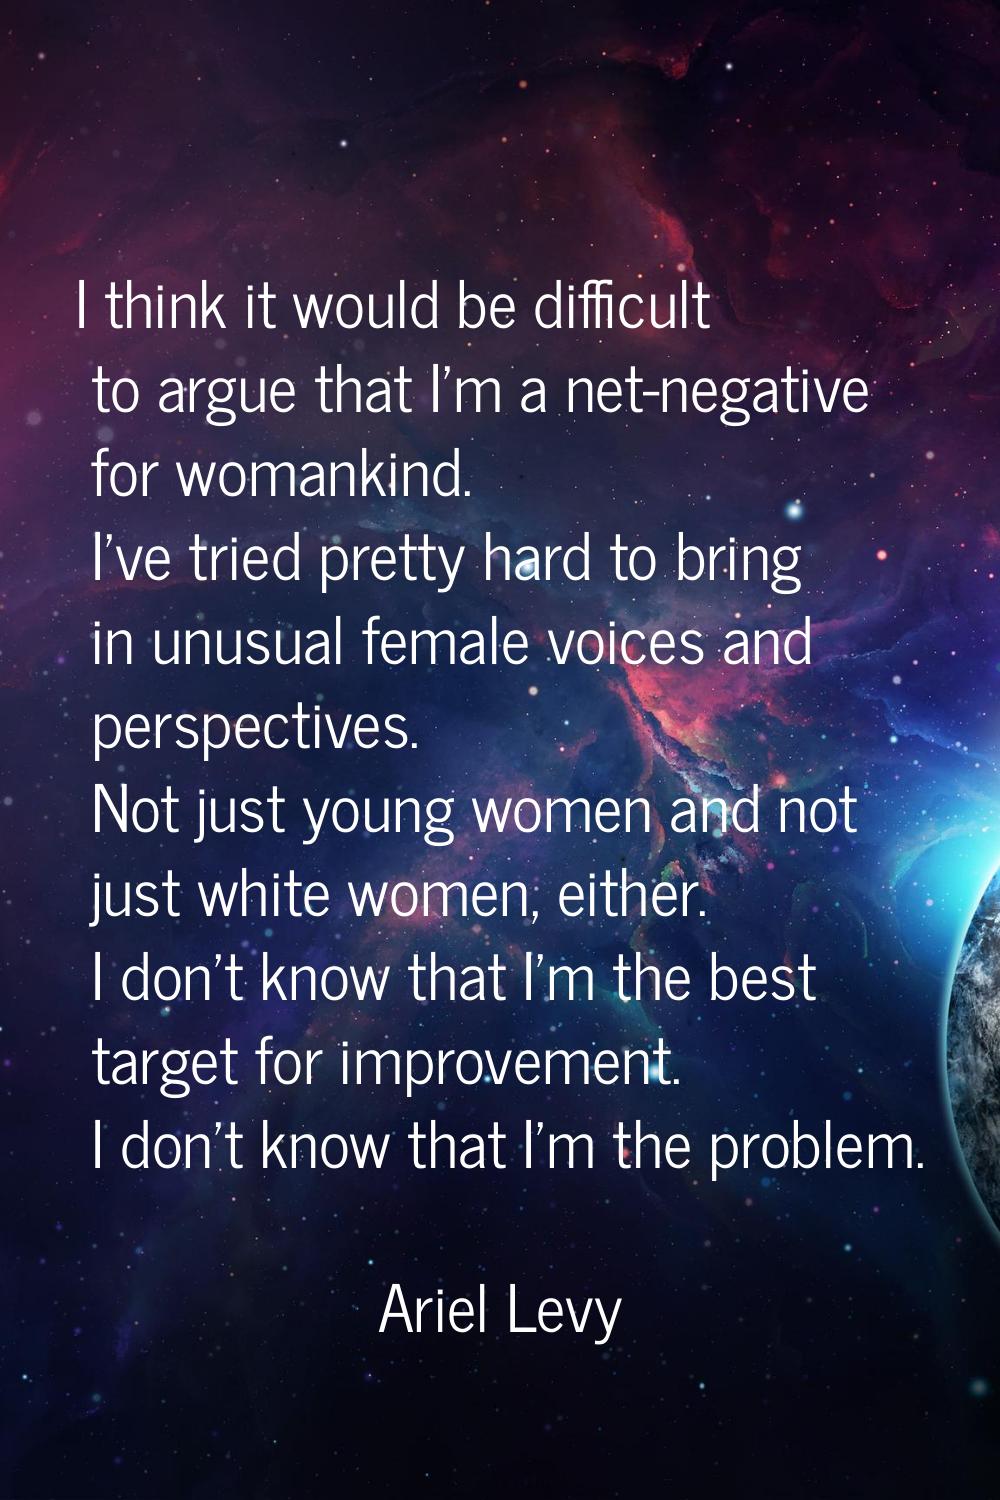 I think it would be difficult to argue that I'm a net-negative for womankind. I've tried pretty har